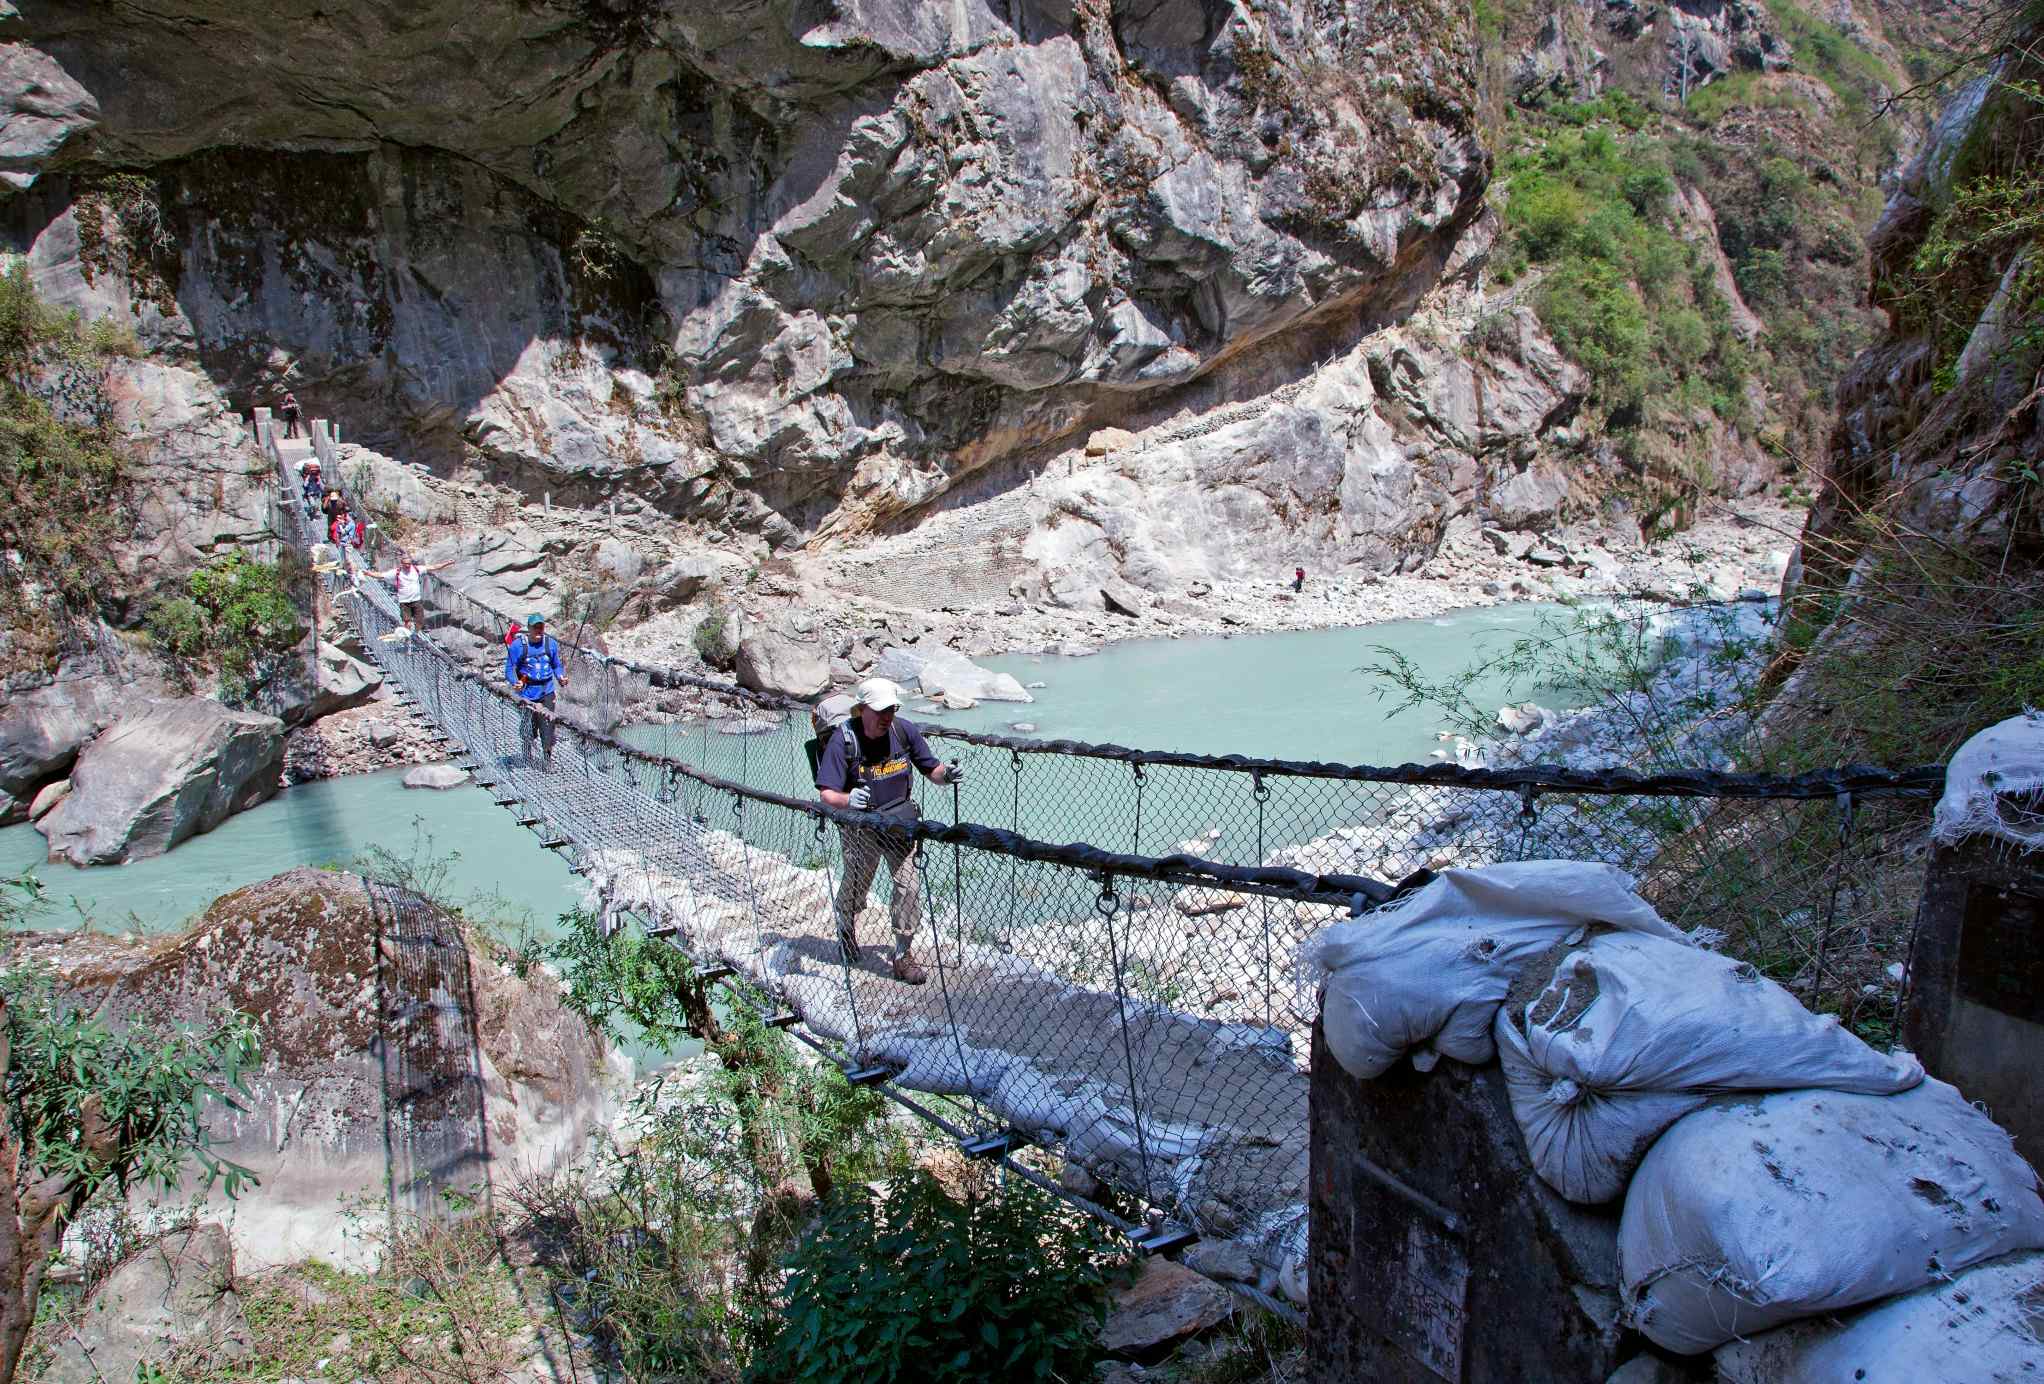 Two hikers crossing a Himalayan rope bridge above a river, Nepal